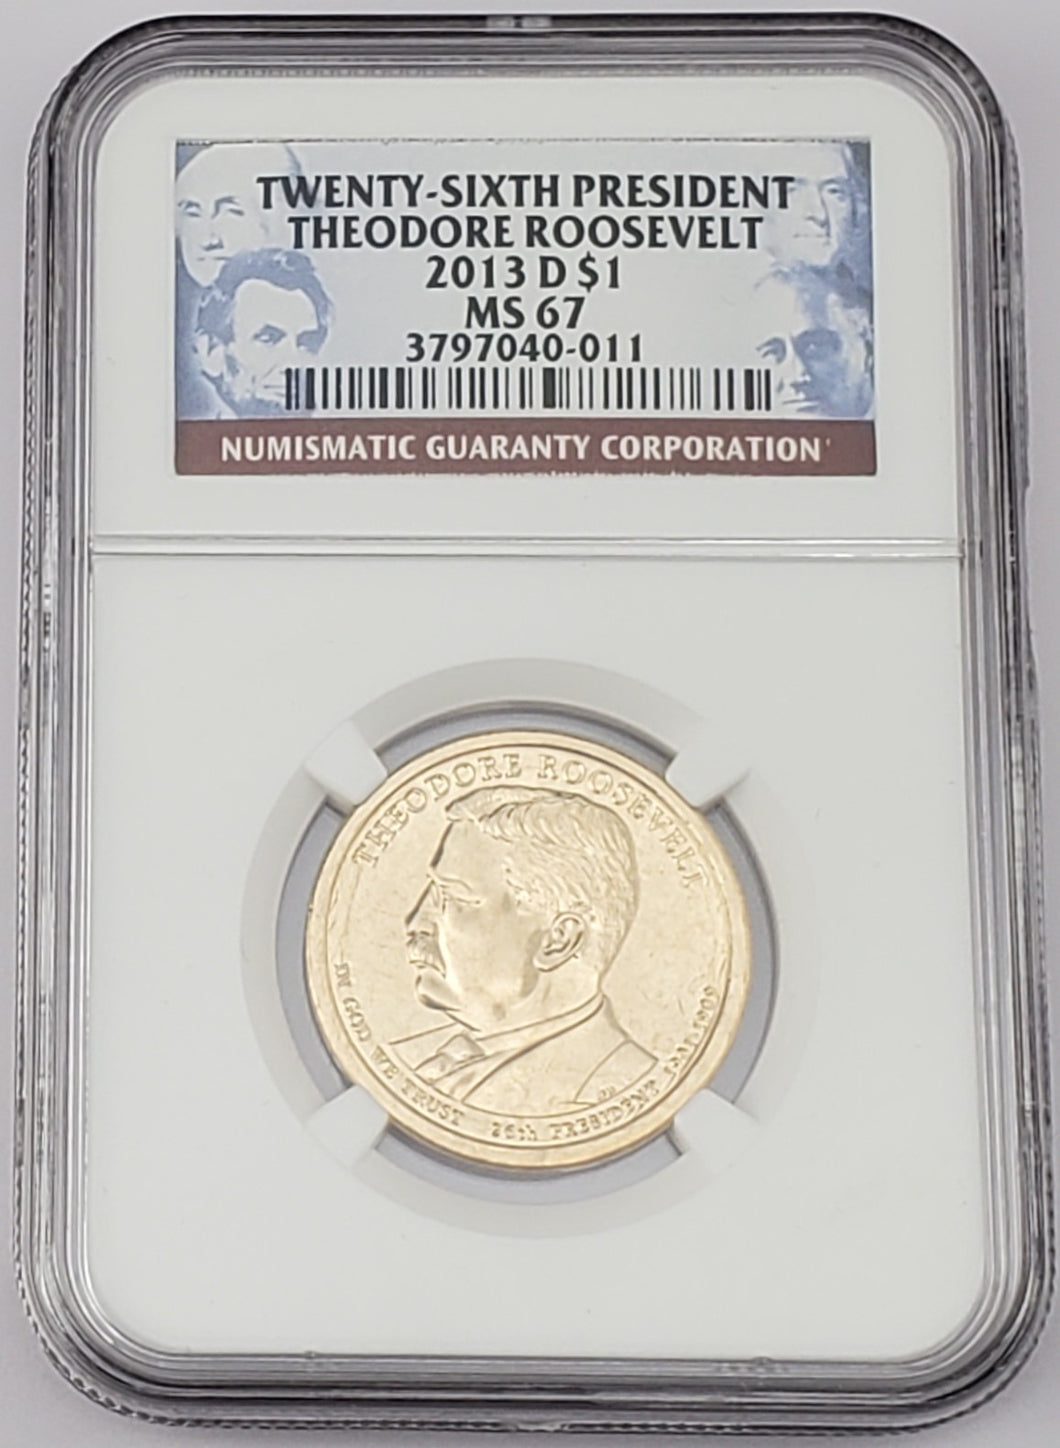 2013 D Presidential Dollar $1 Theodore Roosevelt 26th President NGC MS 67